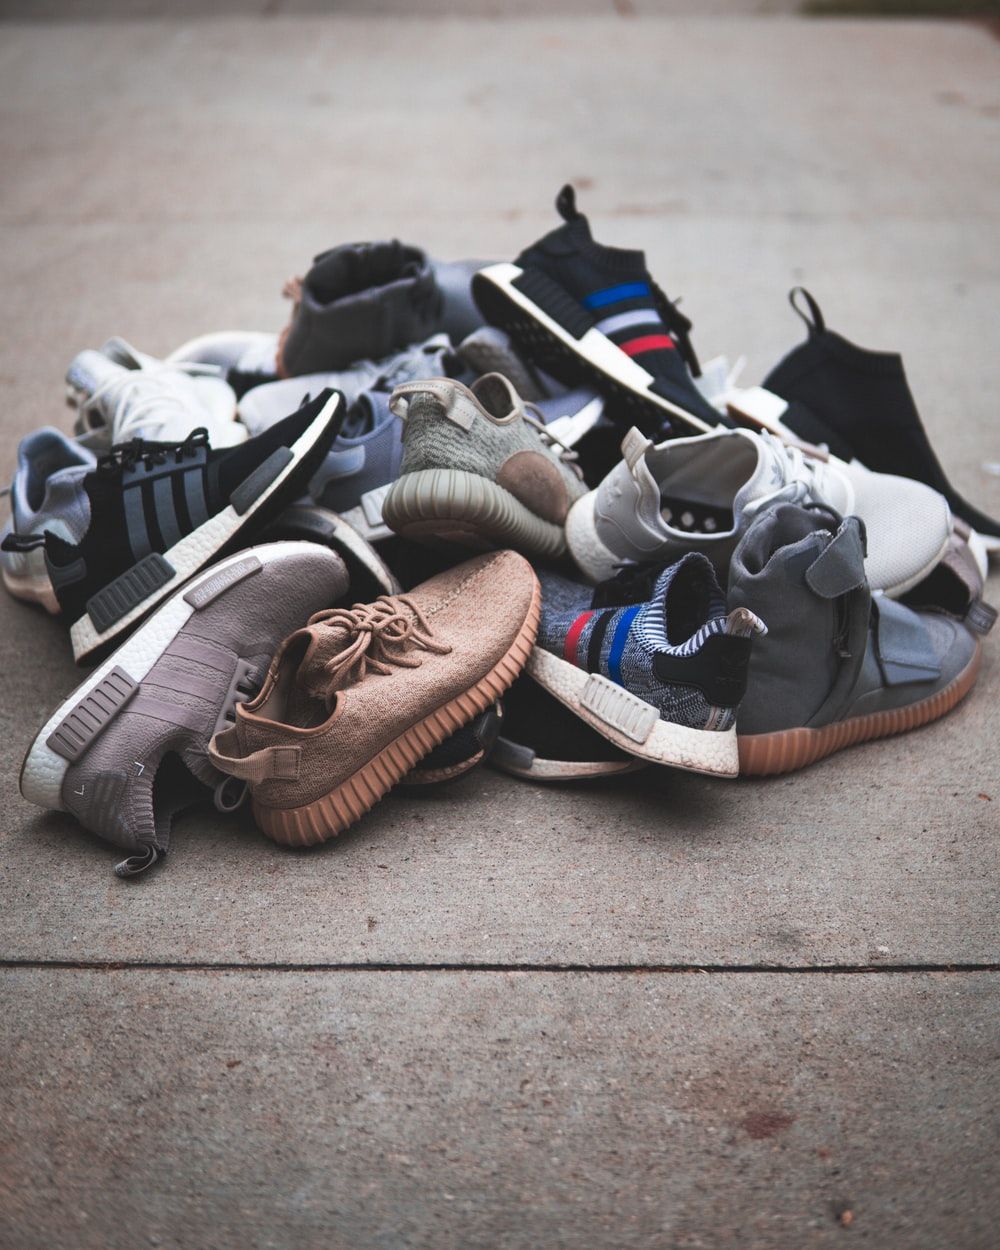 Yeezy Picture. Download Free Image